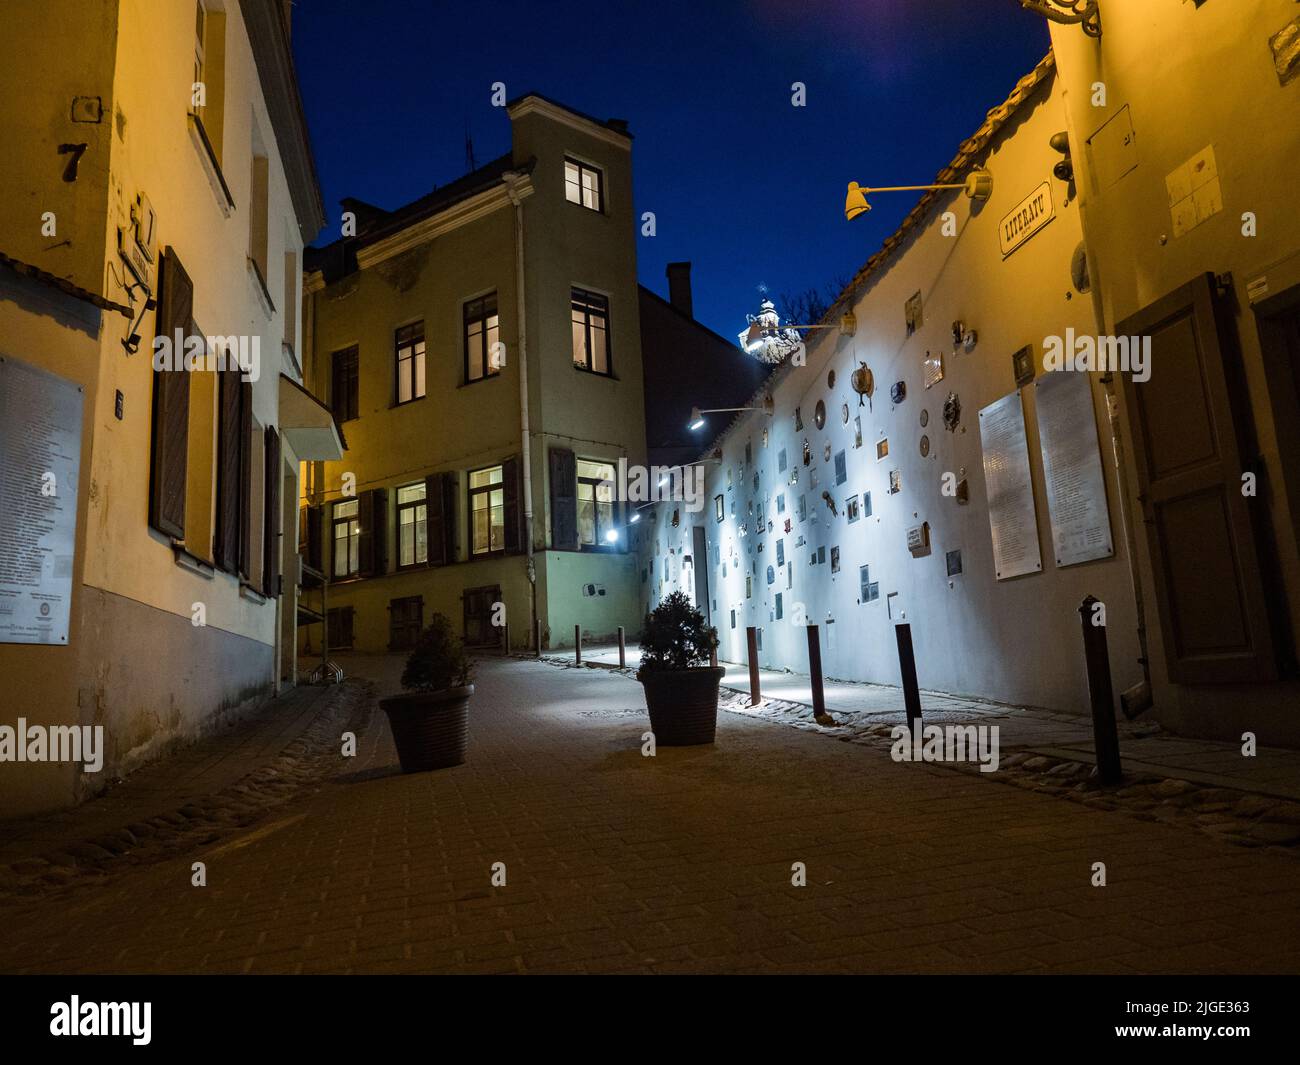 Vilnius, Lithuania - Apr, 2018:  The wall with dedications to writers, poets, translators on Literatu Street - oldest street in the Old Town (Literatų Stock Photo